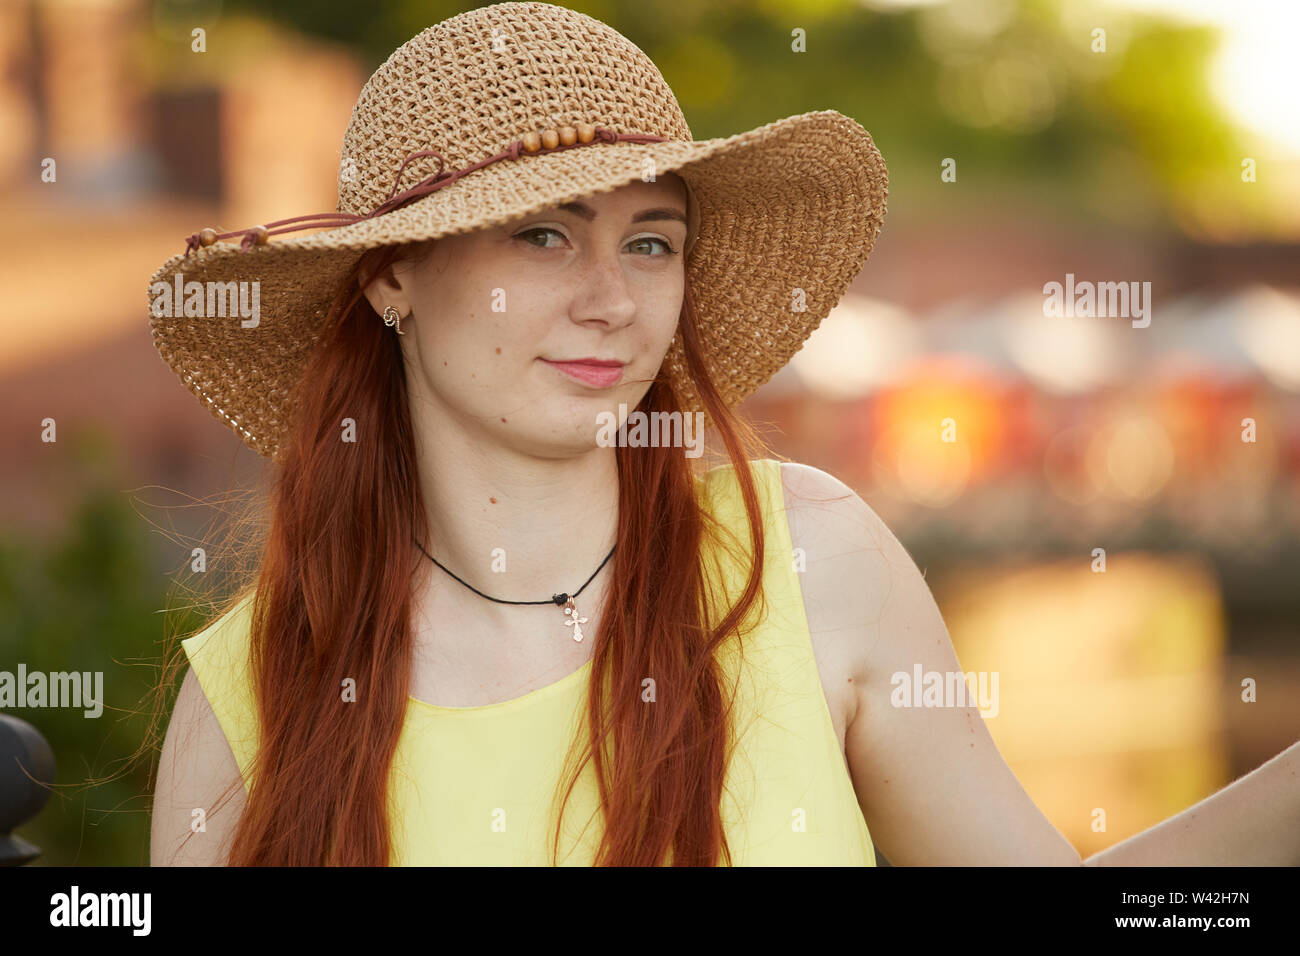 pretty red hair girl in sun hat looking at camera, smiling Stock Photo